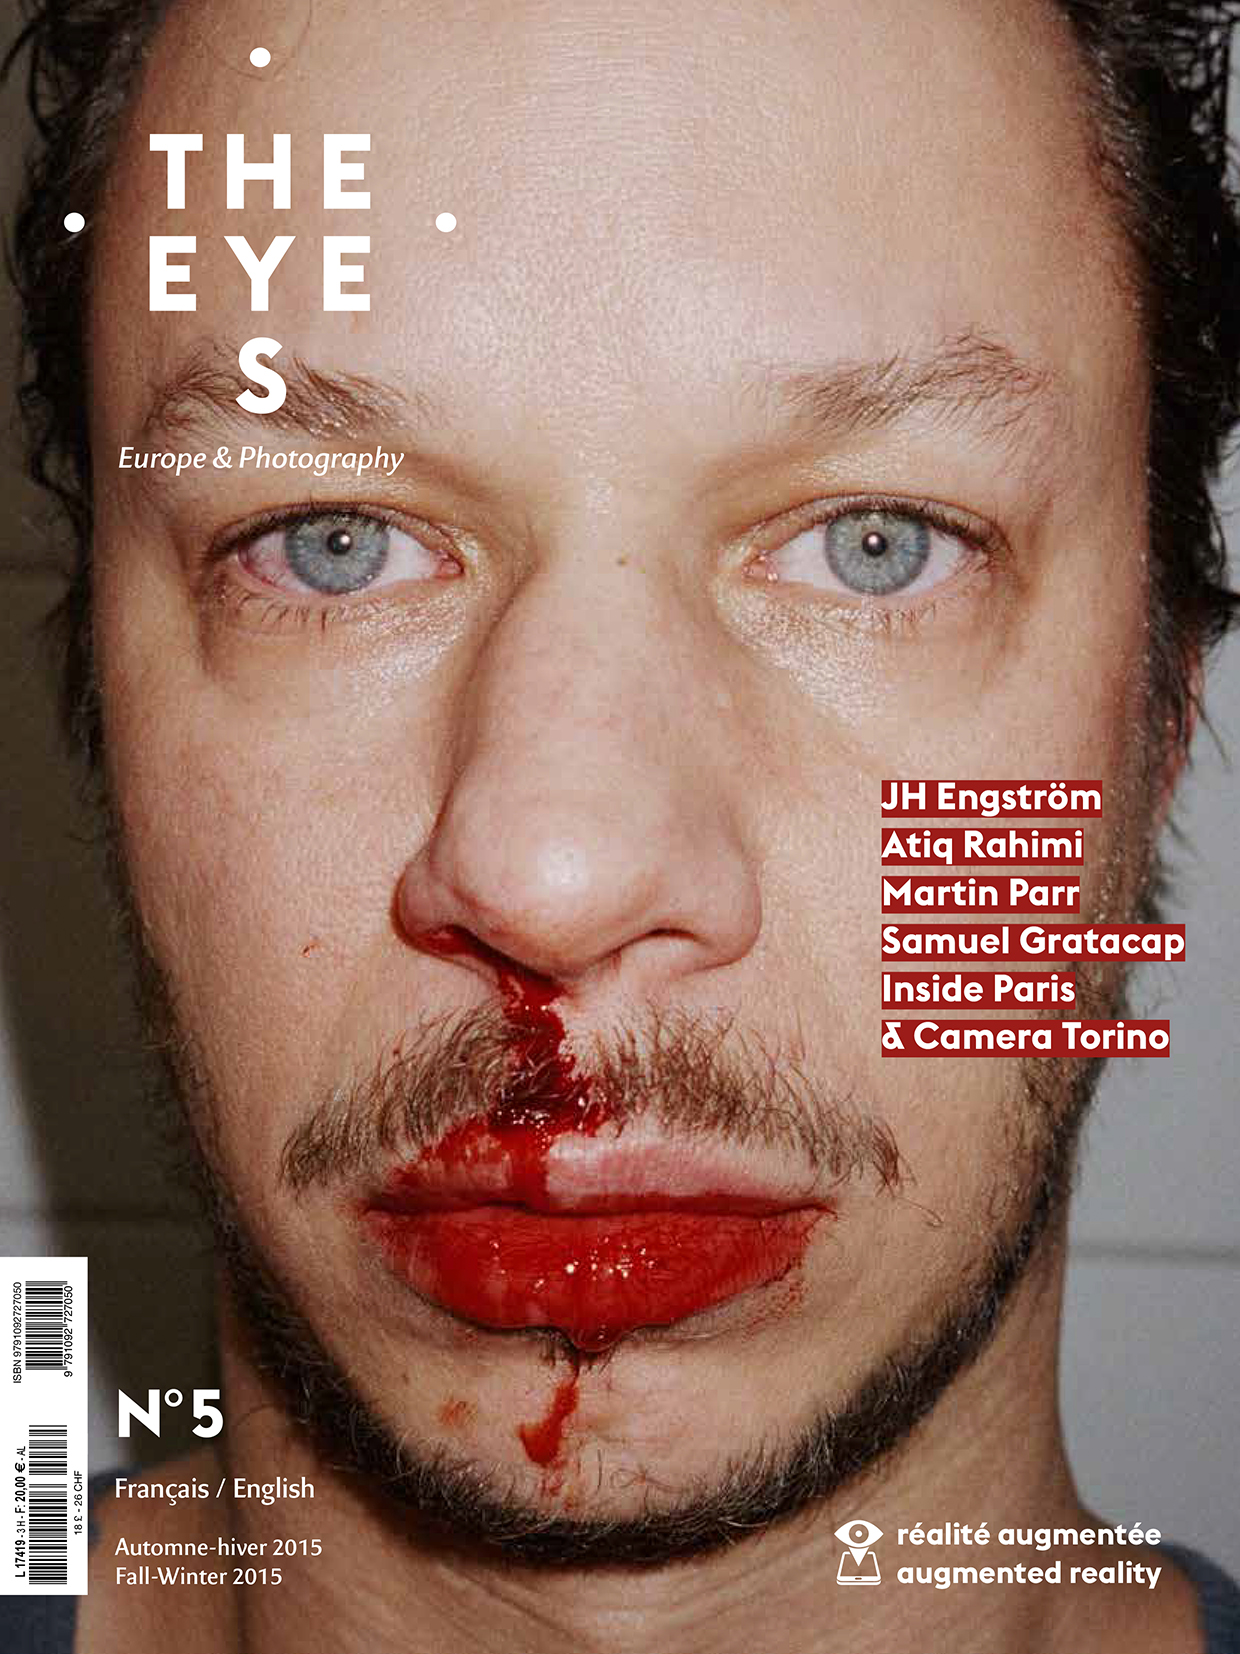 TheEyes_5_Cover2.jpg